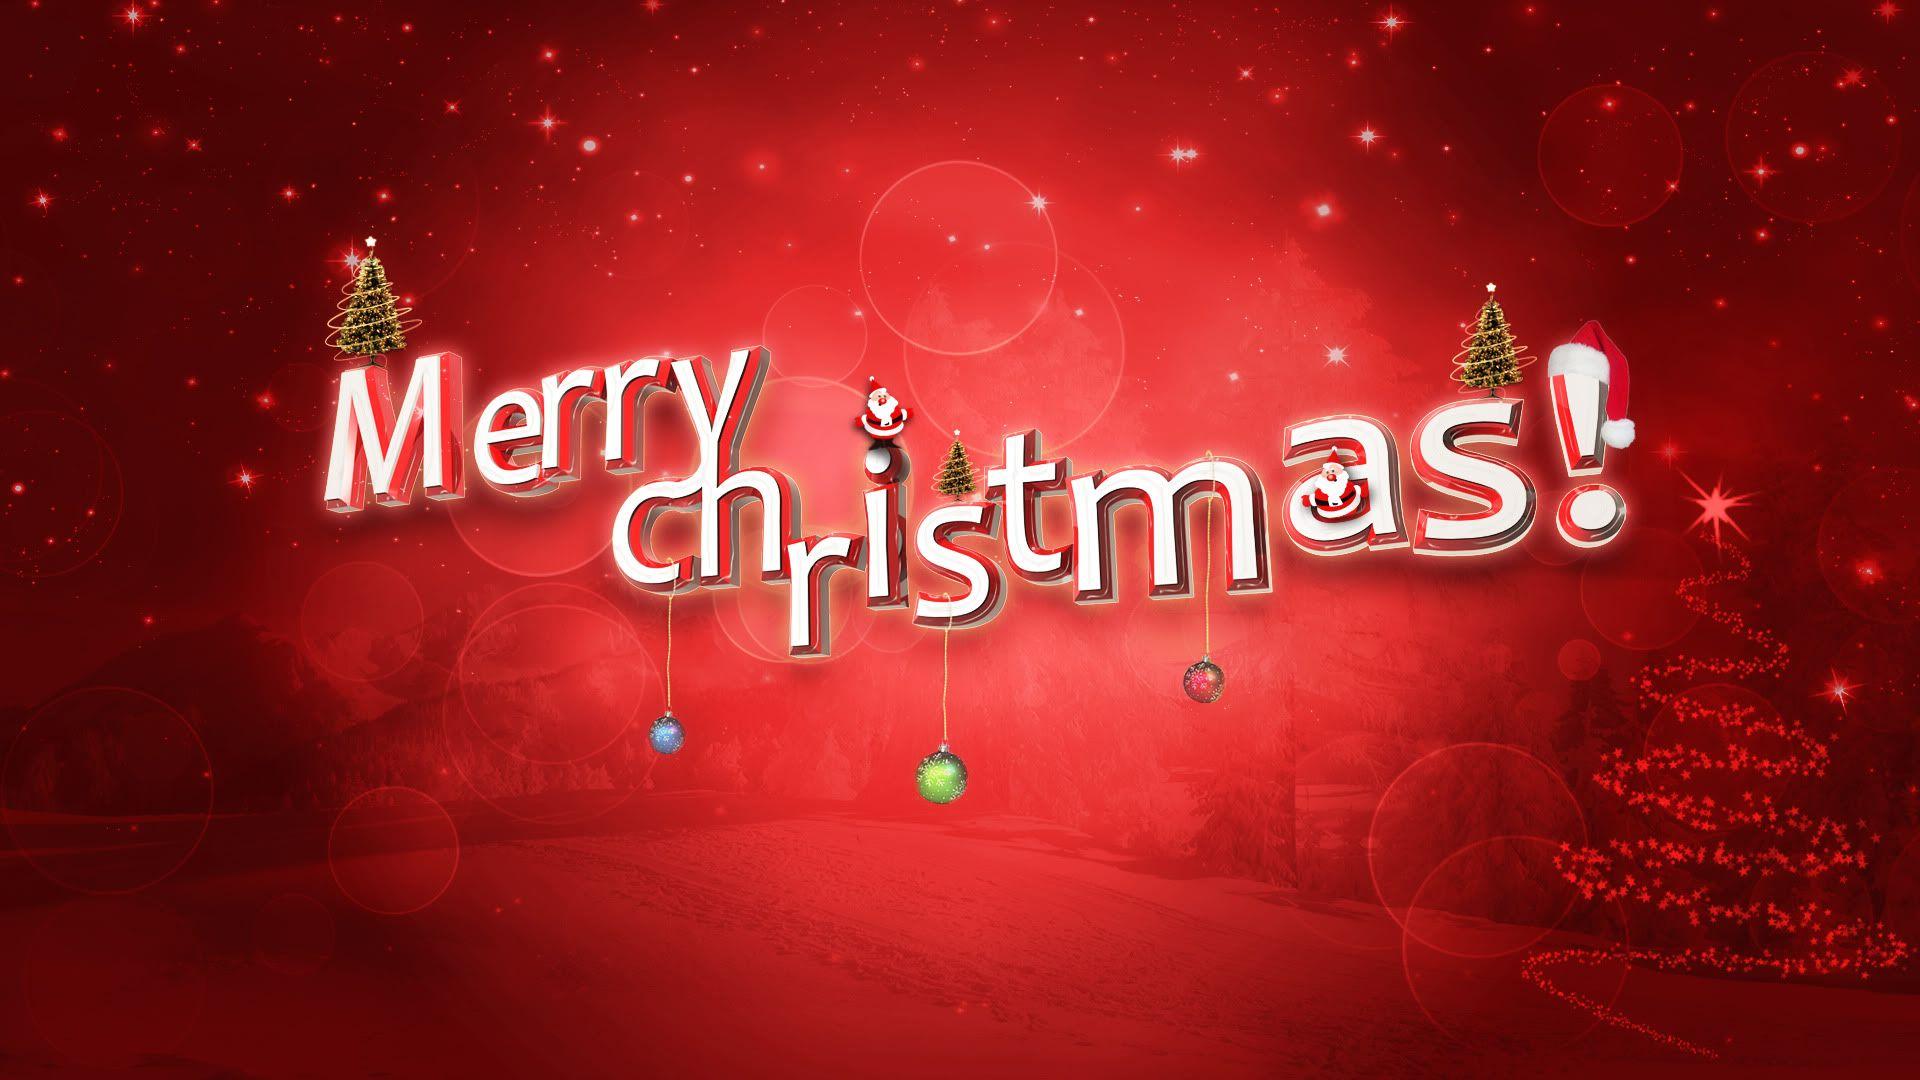 Merry Christmas Image 2020 Pictures Photos Pics Wallpapers Download.